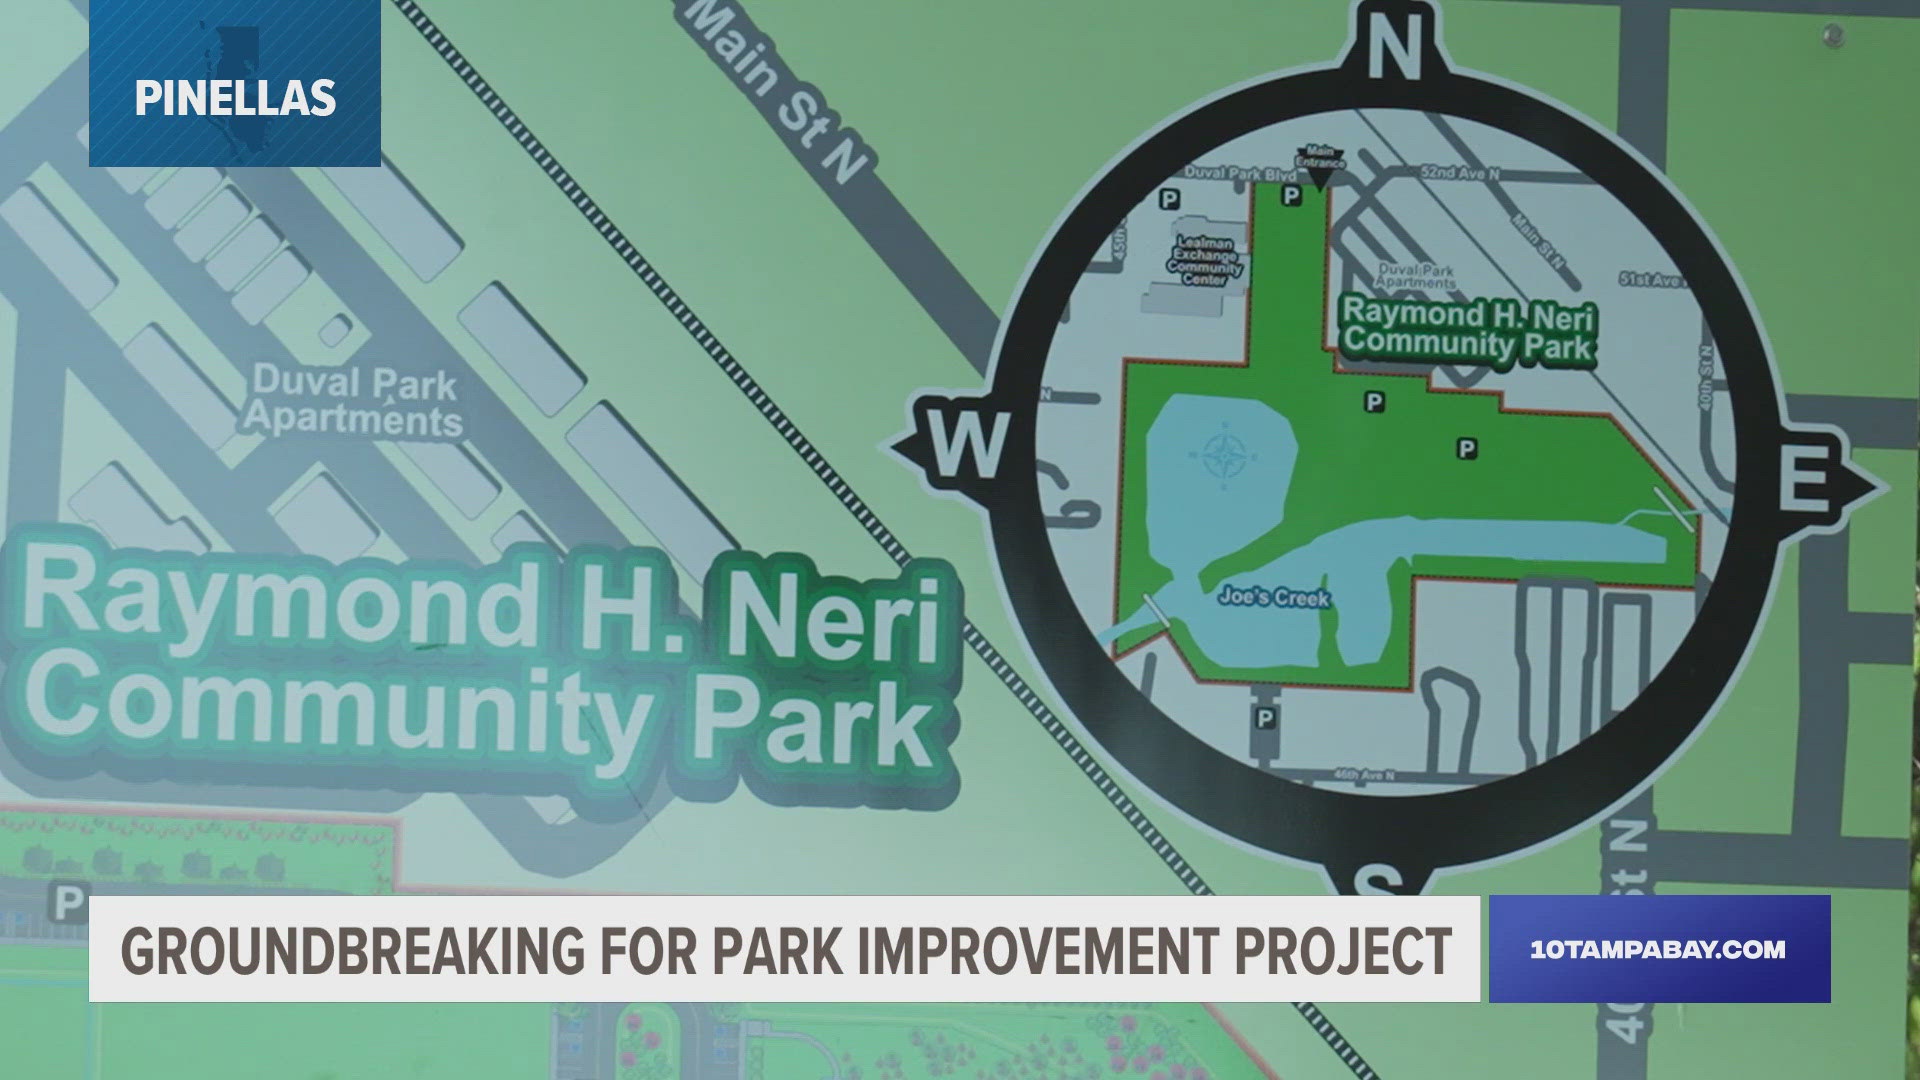 Raymond H. Neri Community Park will add a playground for kids, an adult fitness course, a dog park, a picnic shelter and more.